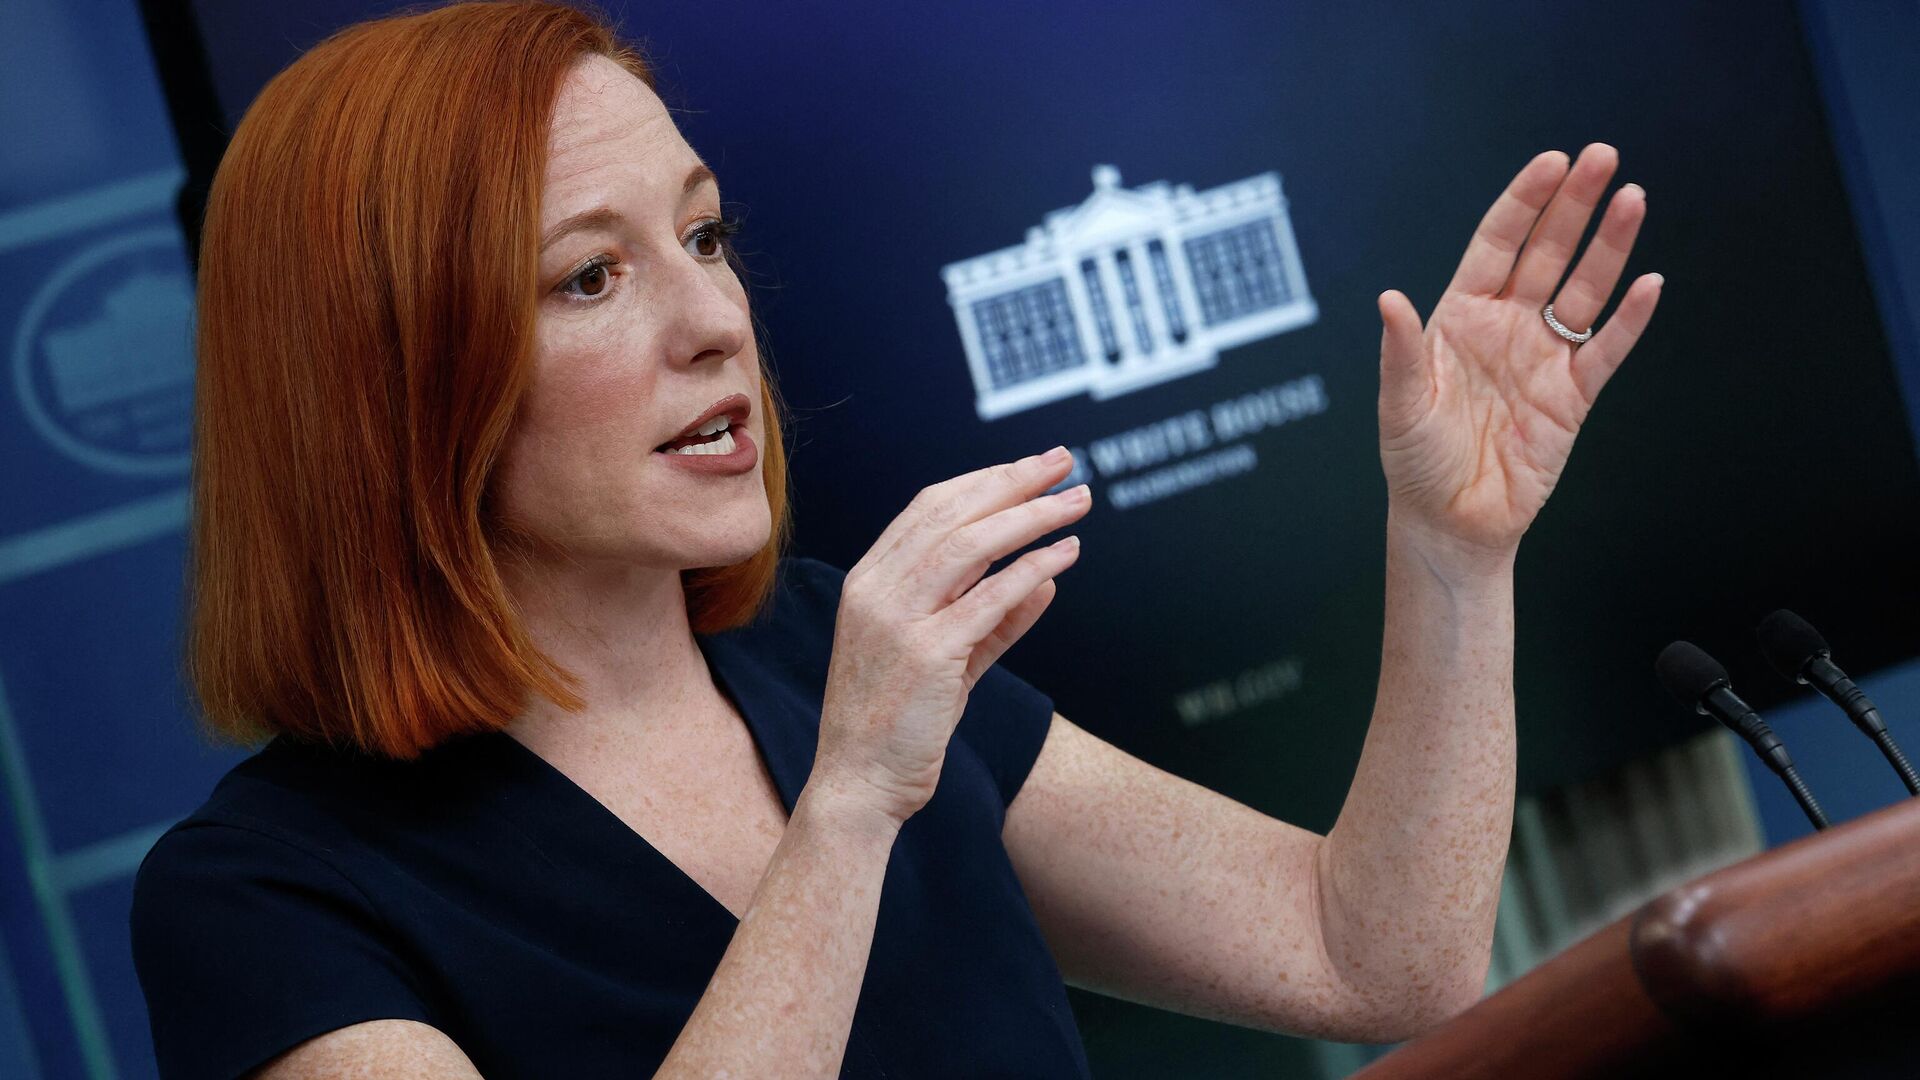 White House Press Secretary Jen Psaki talks to reporters during the daily news conference in the Brady Press Briefing Room at the White House on April 08, 2022 in Washington, DC - Sputnik International, 1920, 21.04.2022